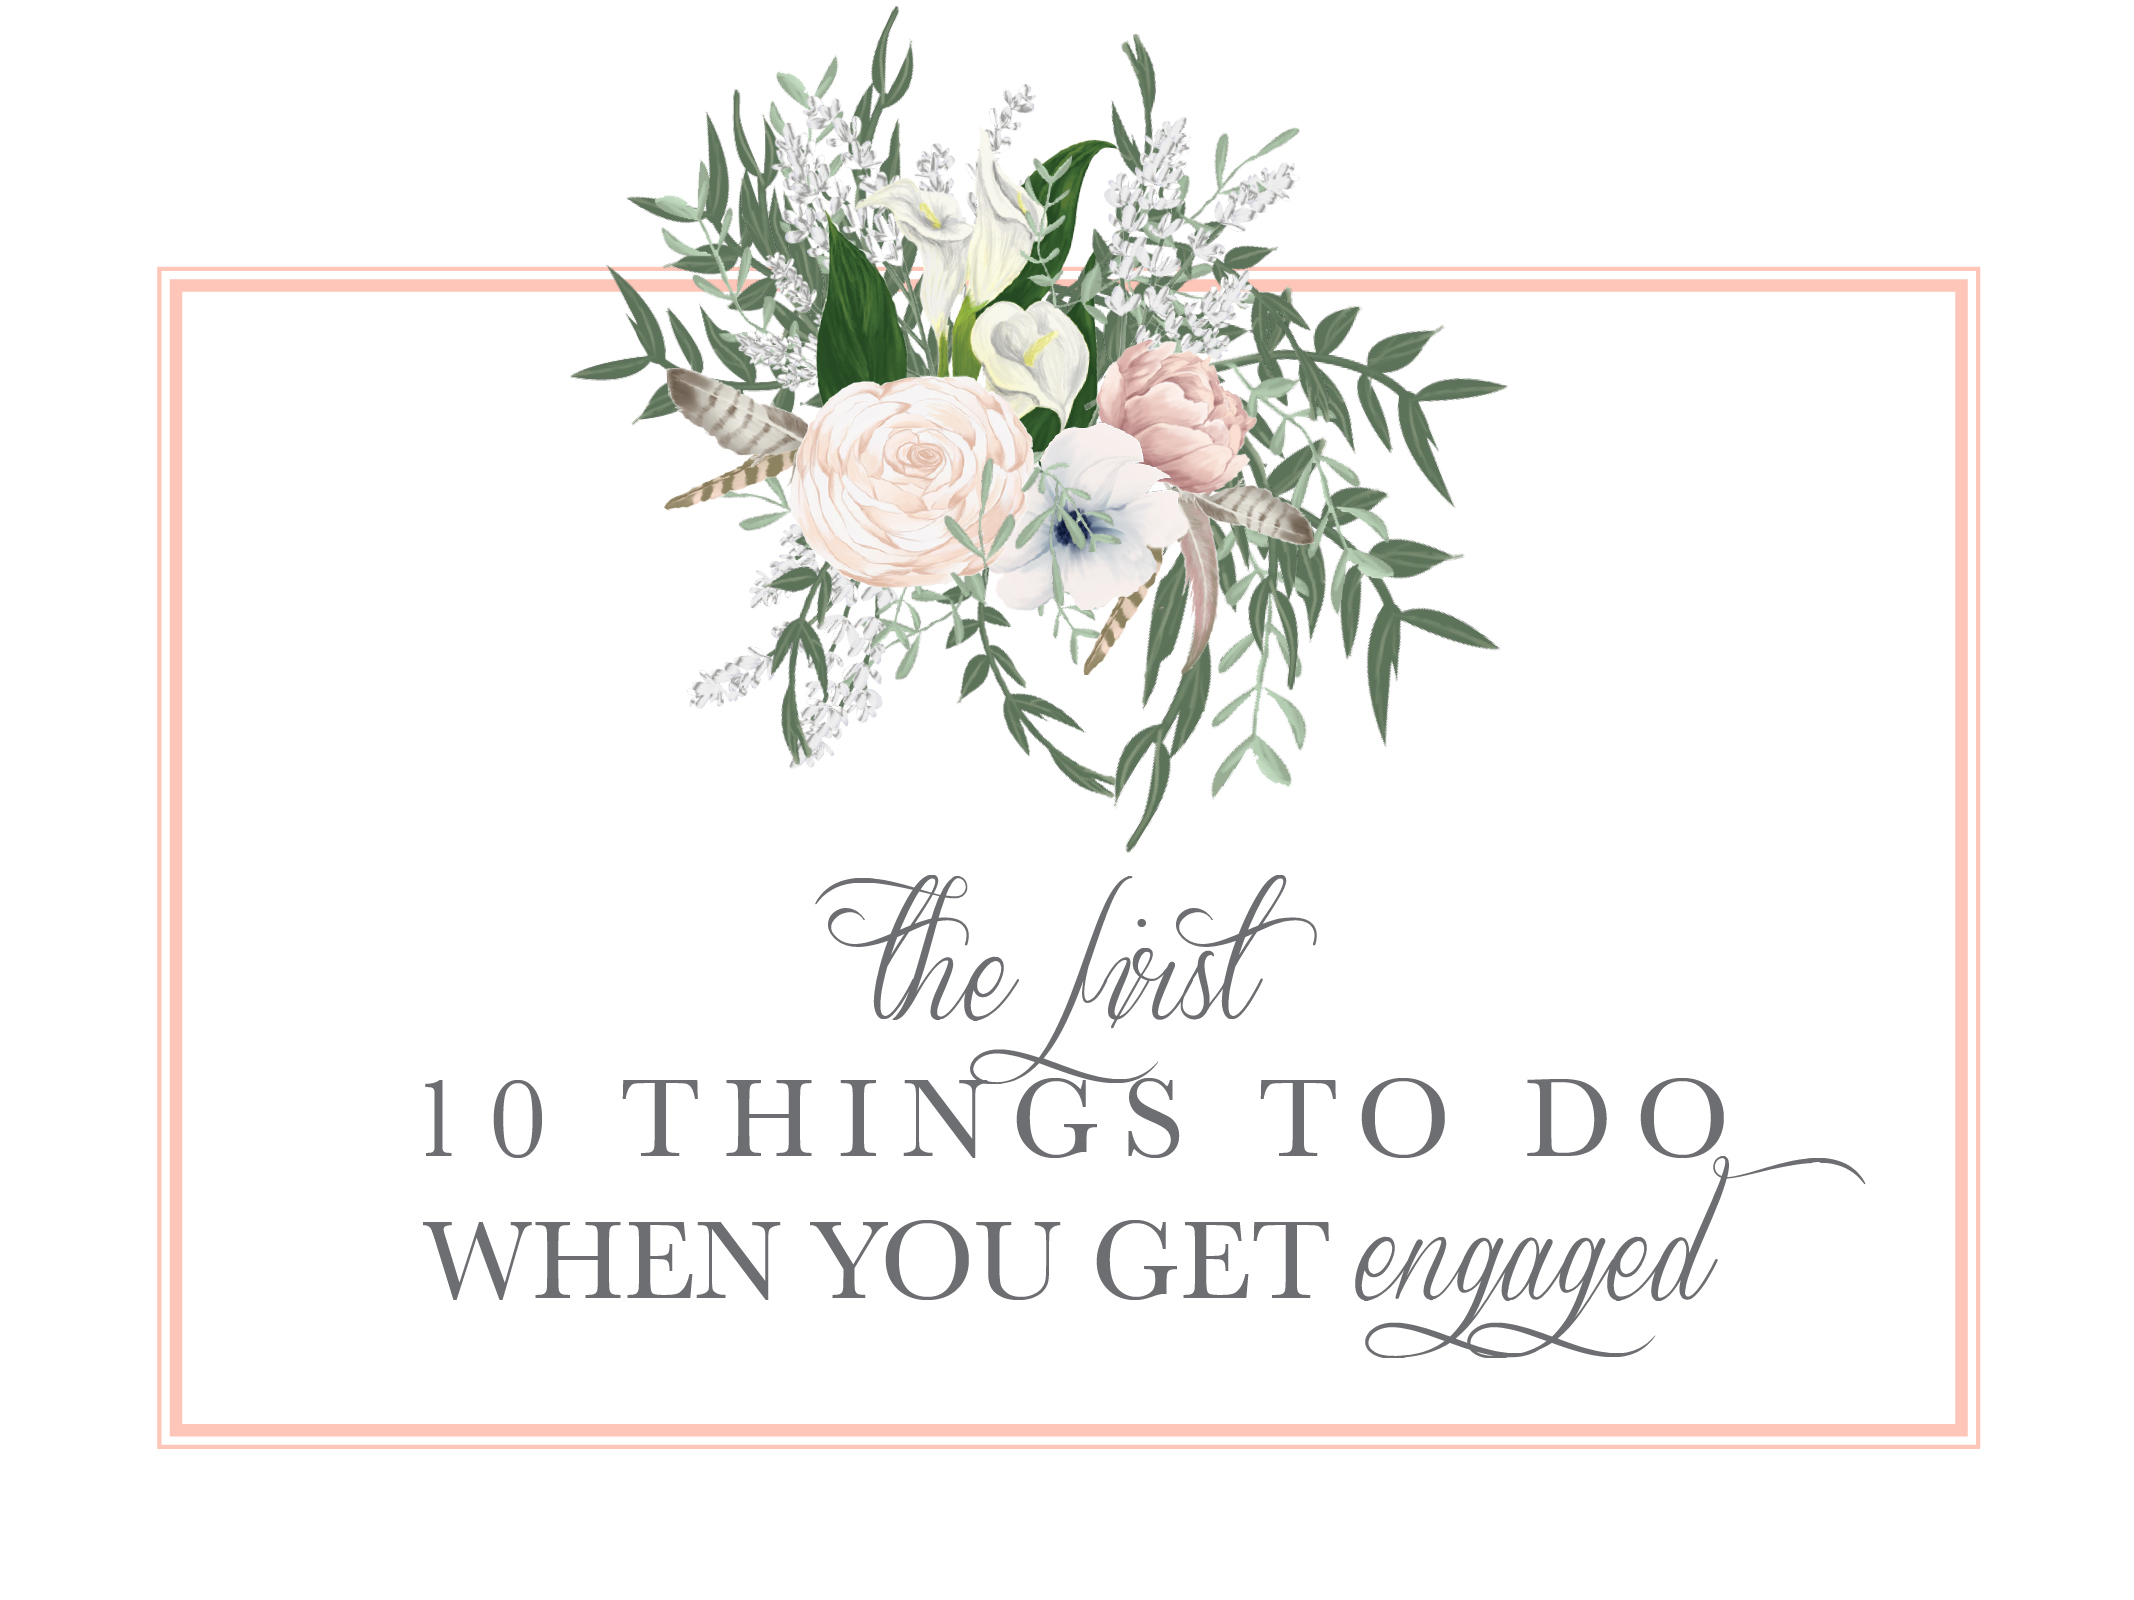 10 Things To Do When You Get Engaged.jpg